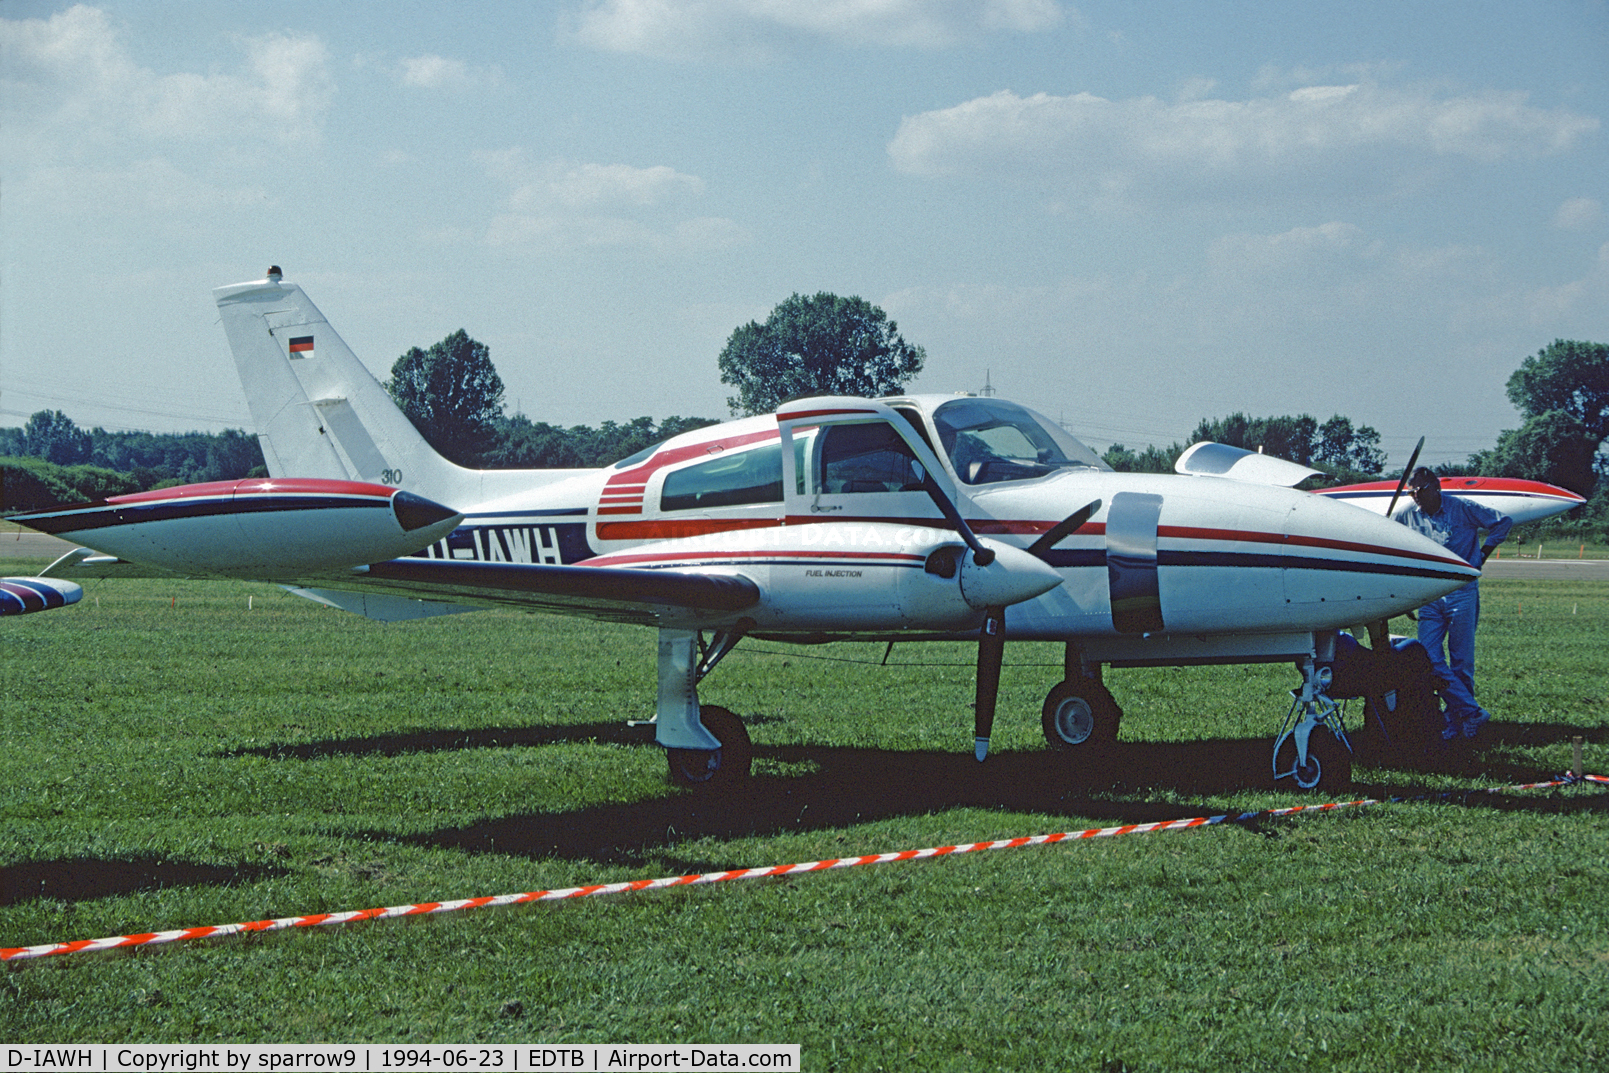 D-IAWH, 1976 Cessna 310R C/N 310R0521, Shown at IGM Baden-Oos